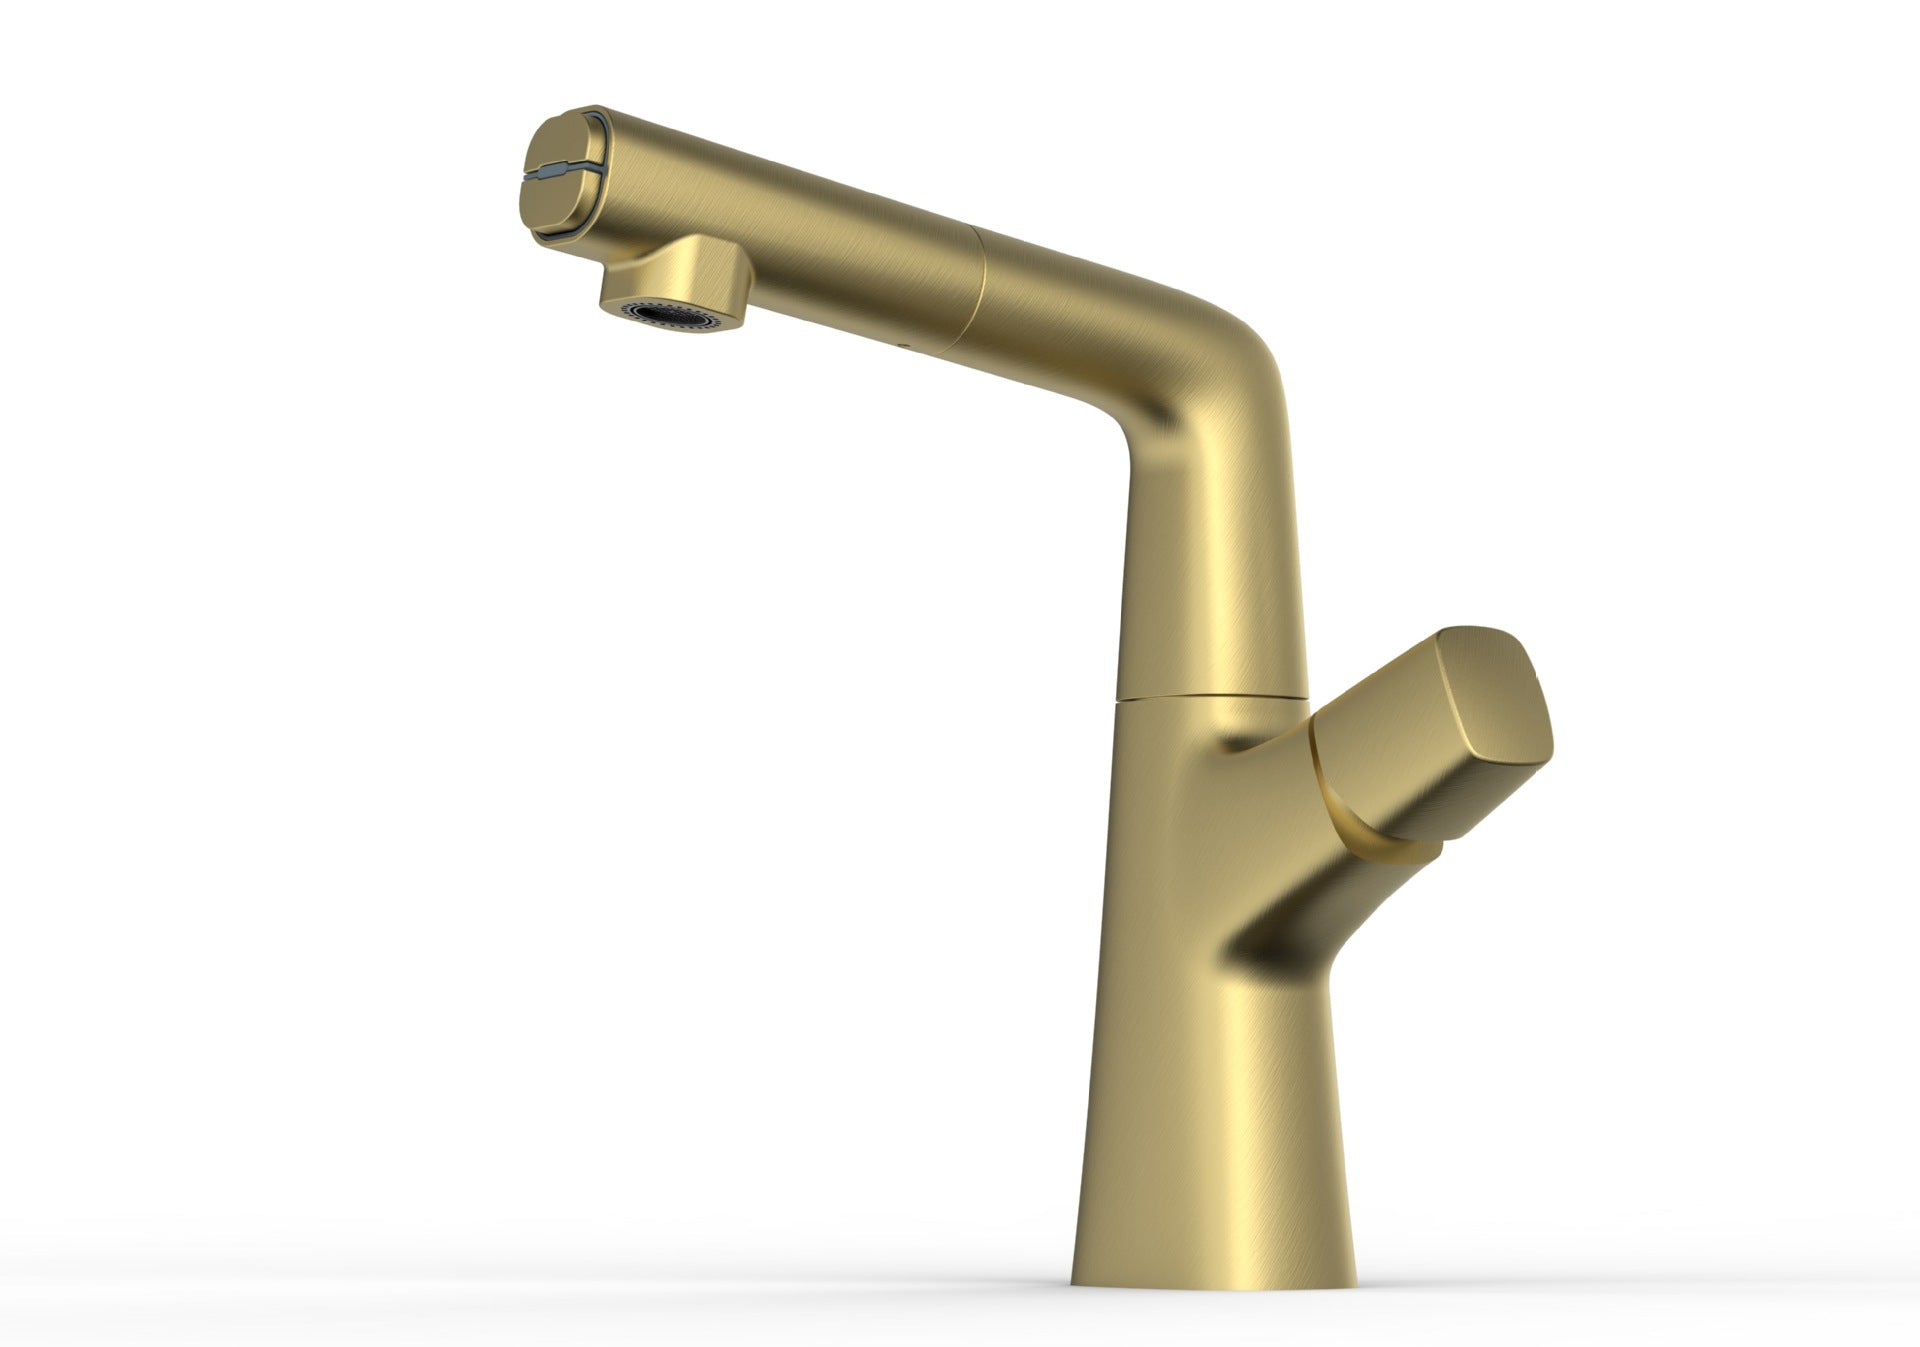 Full Brass Hot and Cold Water Lifting and Pull-Out Bathroom Faucet